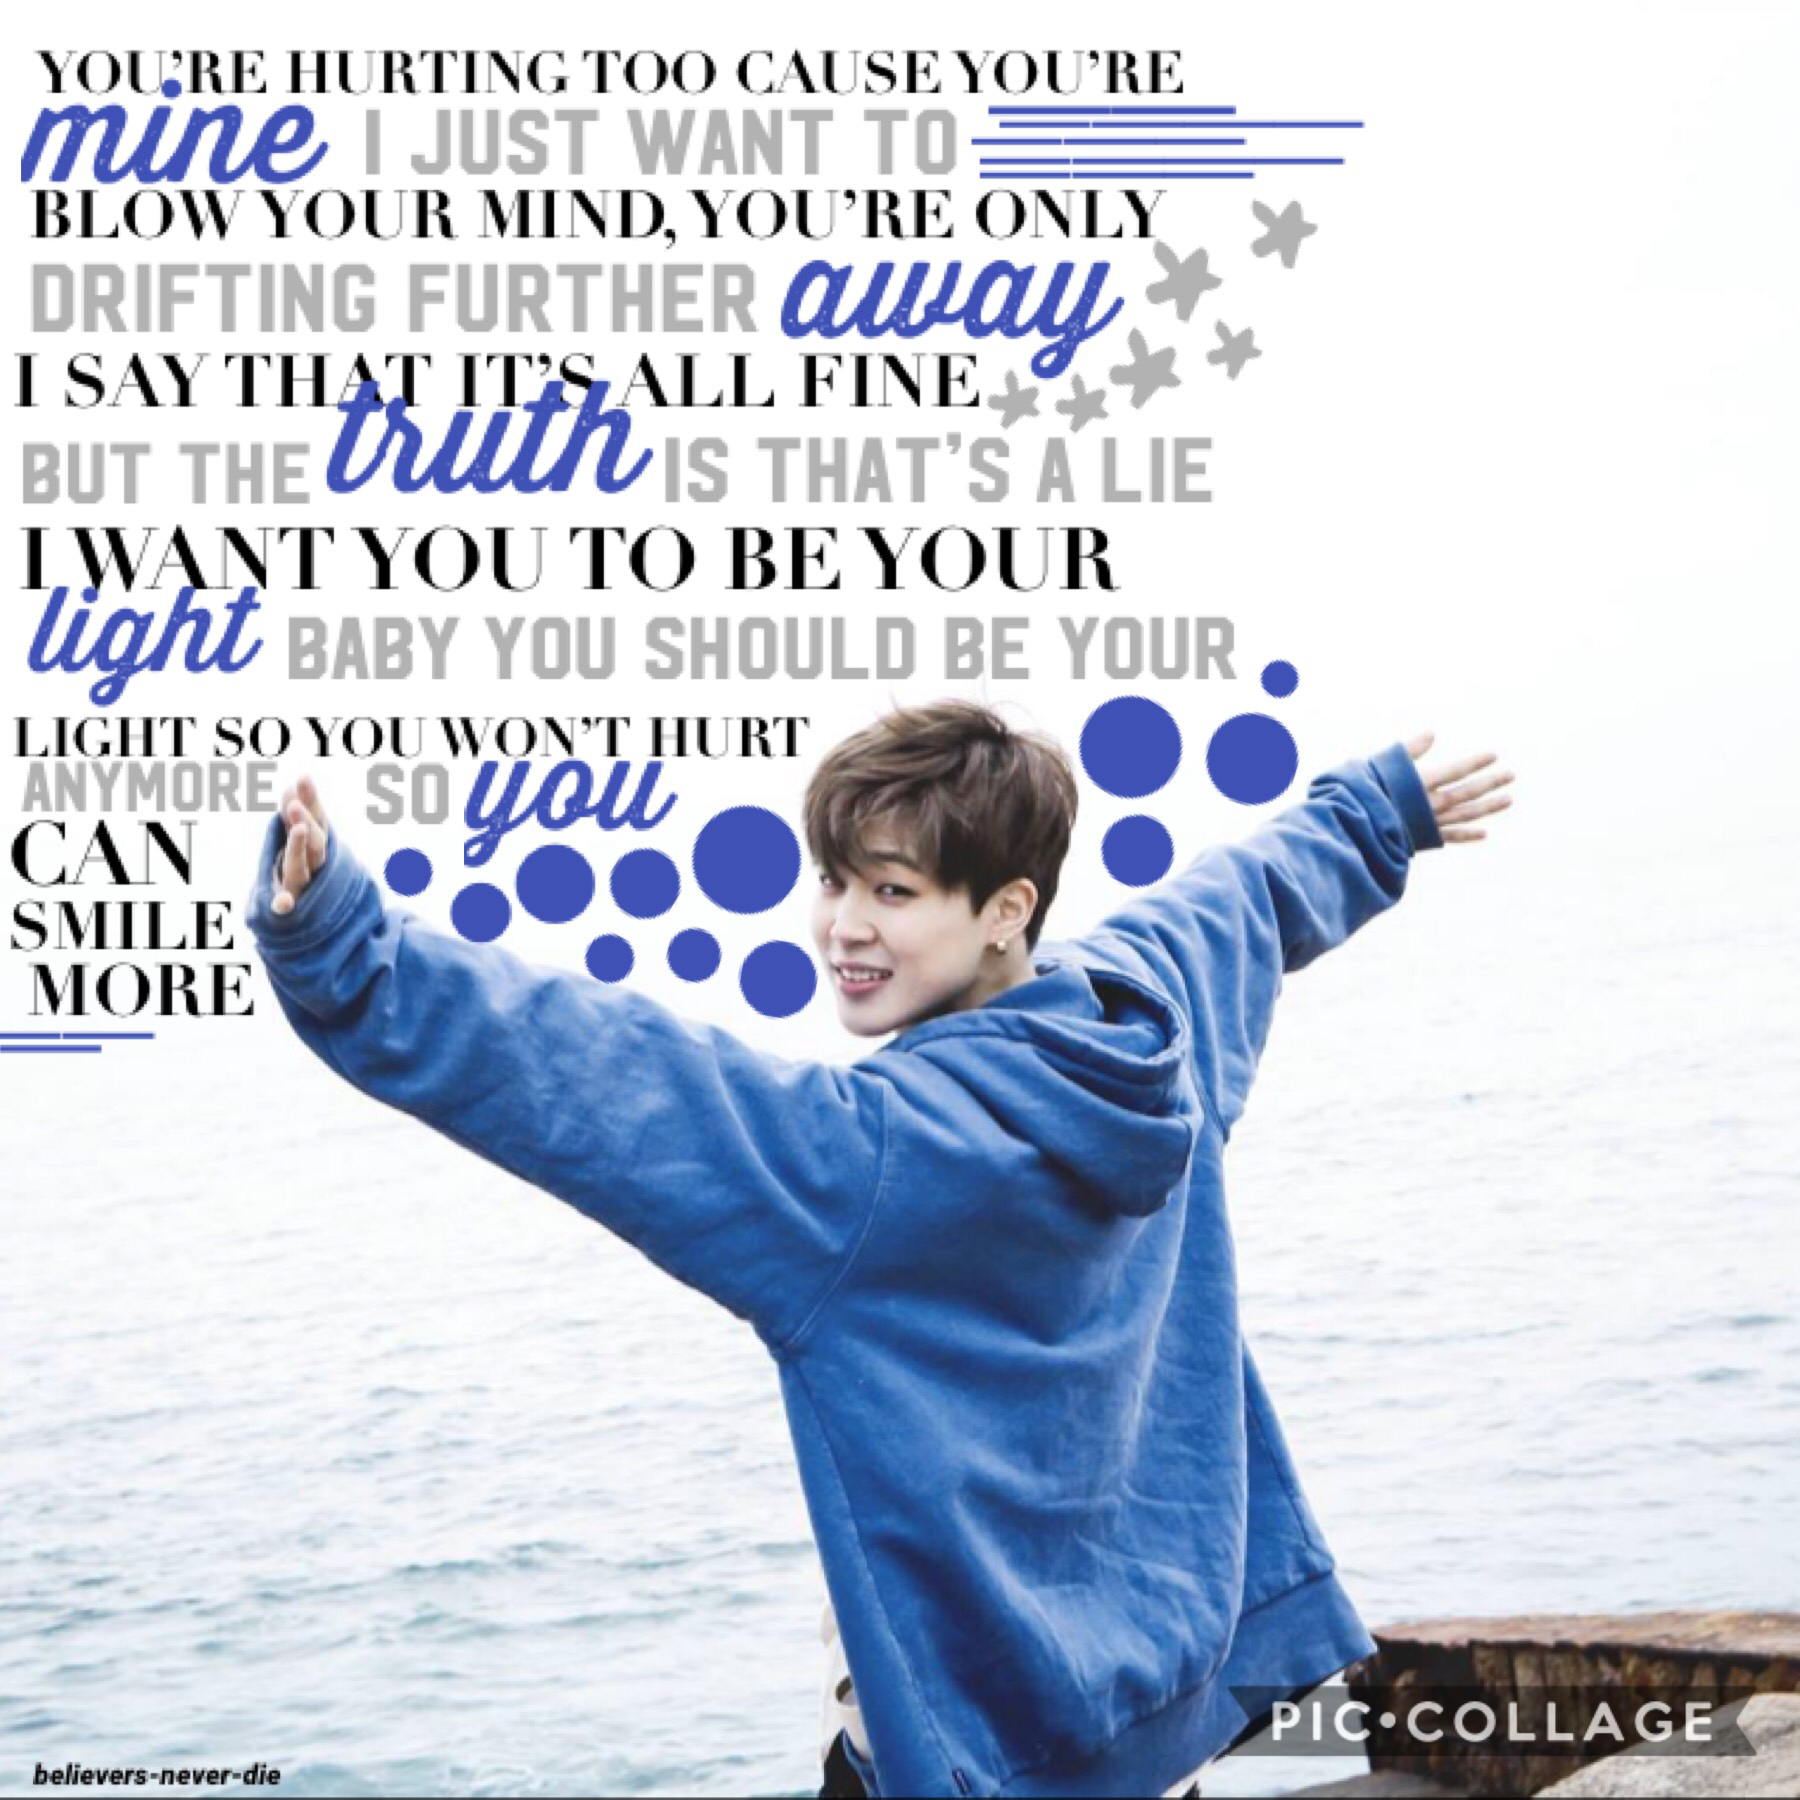 🌧promise // tap🌧

ah this isn’t too good but oh well! i love this song so much, this man really means the world to me!! i’m going to see panic! in a week and i’m so excited omggggg. also a bts comeback in less than a month oof i’m not prepared! <3